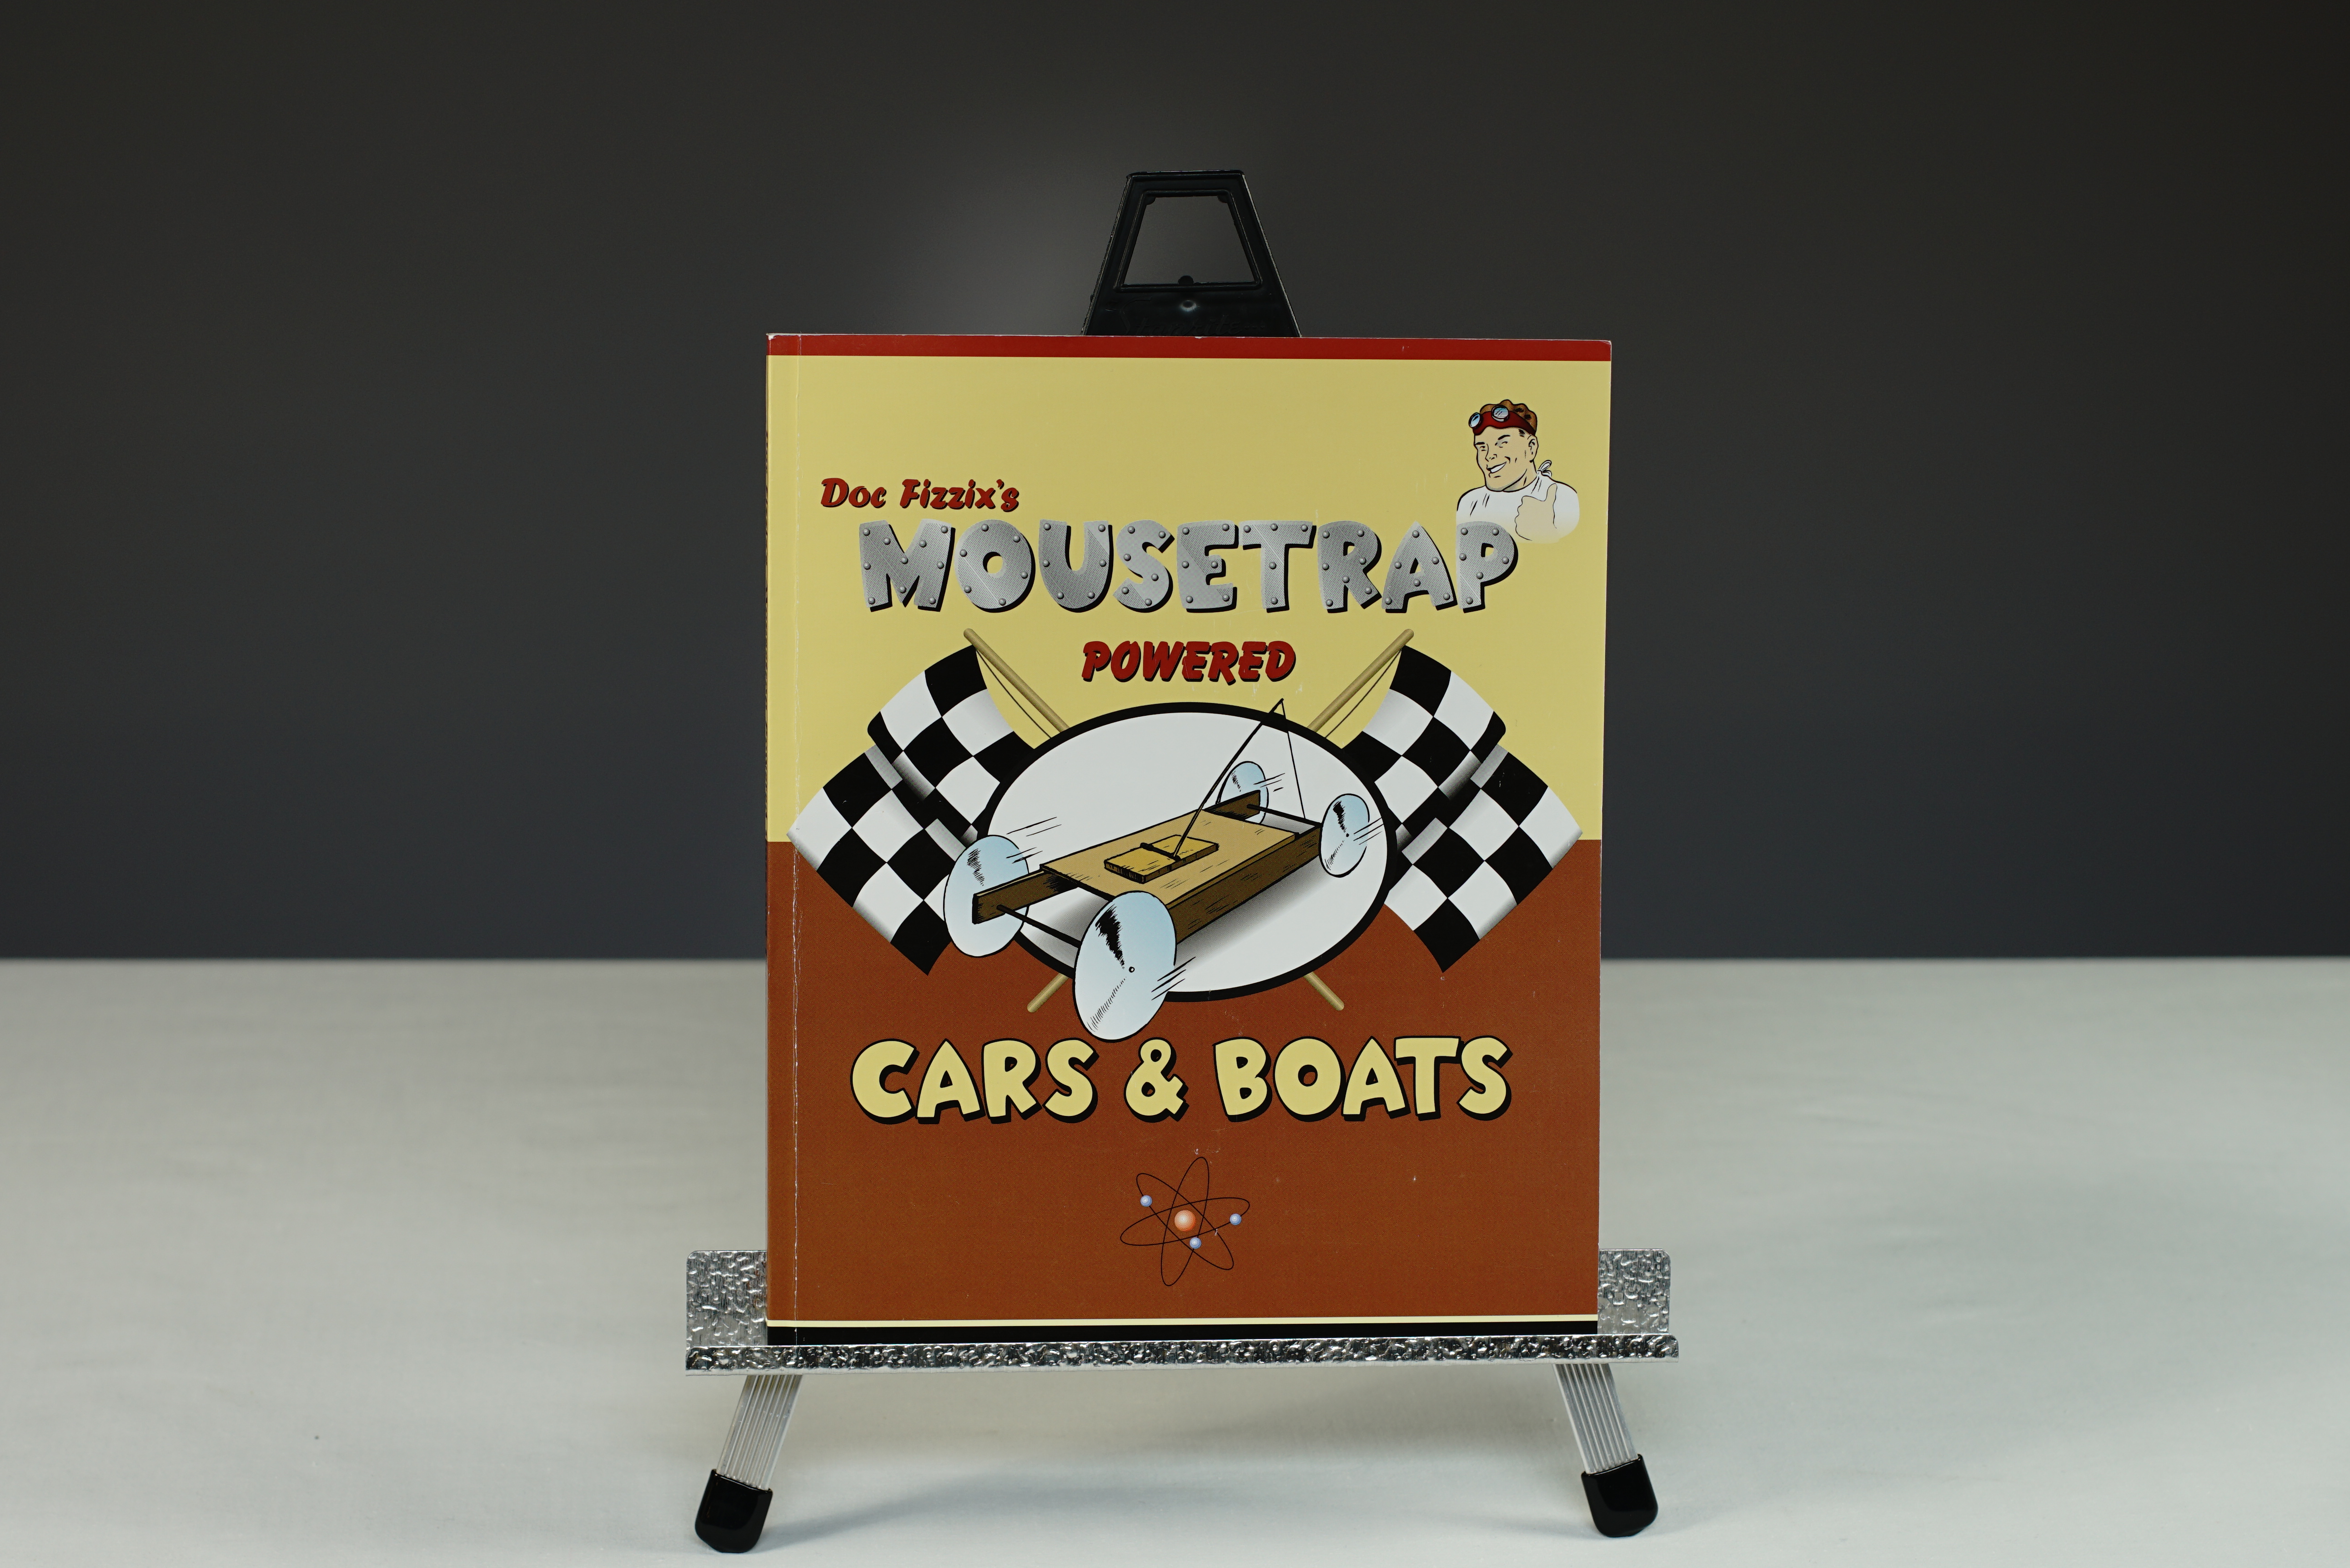 Doc Fizzix's Mousetrap Powered Cars and Boats Book